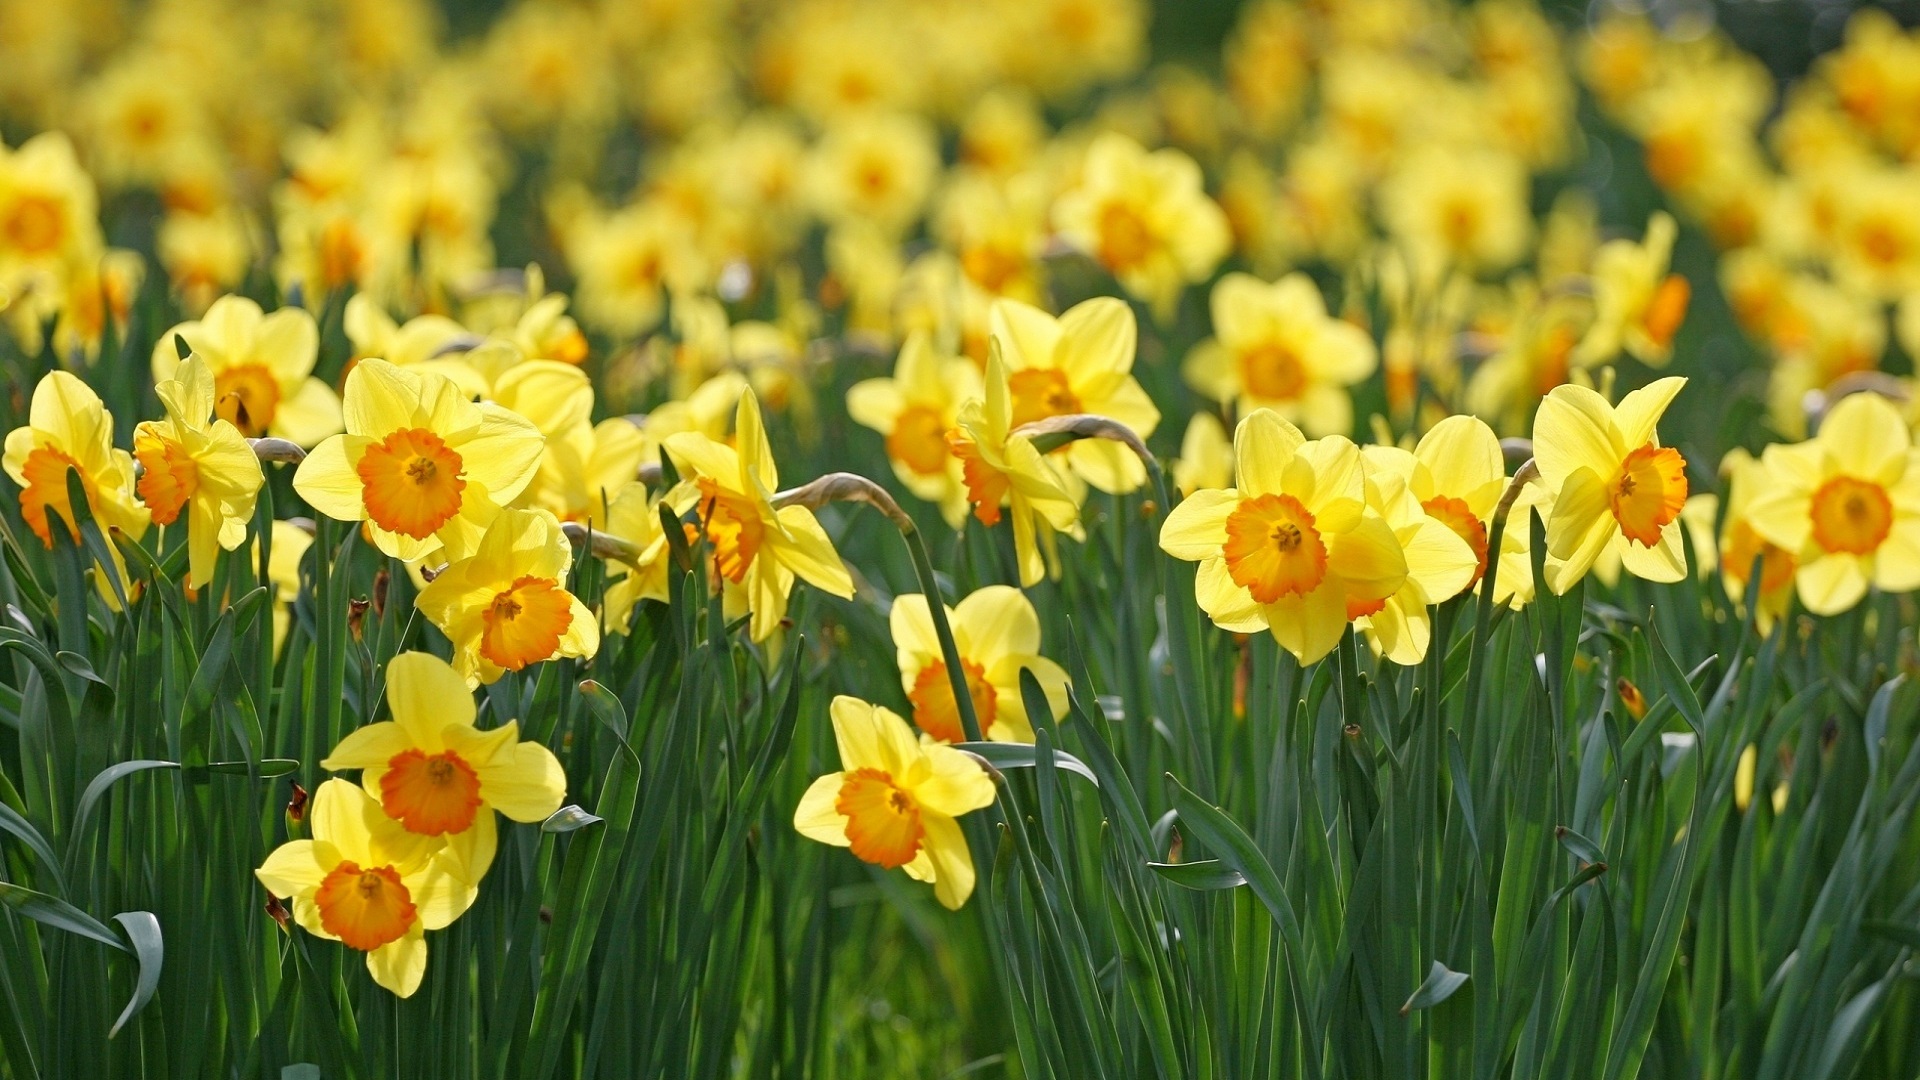 Daffodils Wallpaper Background Related Keywords